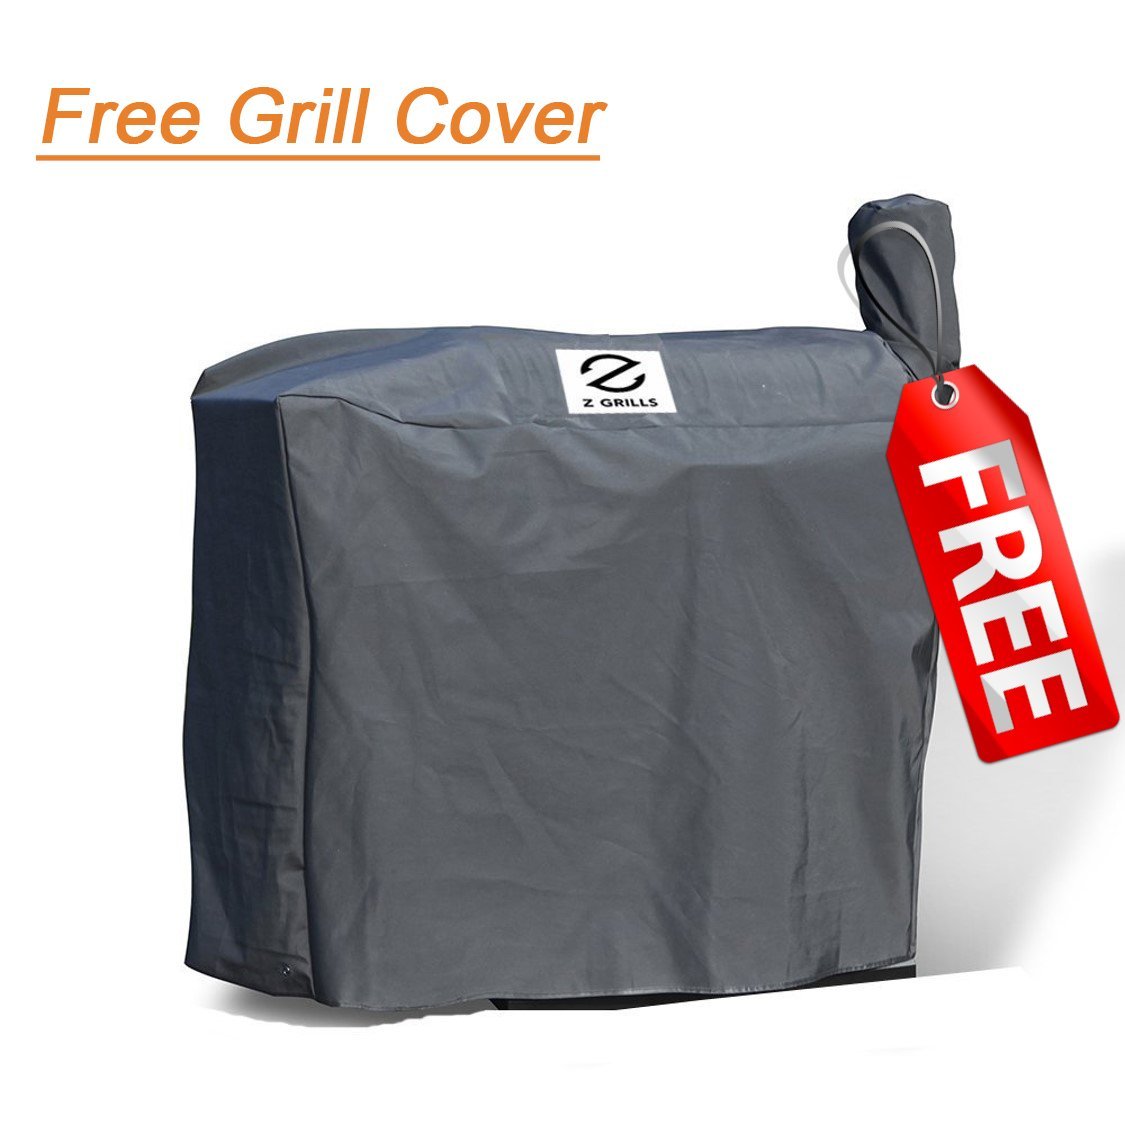 Z GRILLS Wood Pellet BBQ Grill and Smoker with Digital Temperature Controls and Free Patio Cover - image 5 of 10